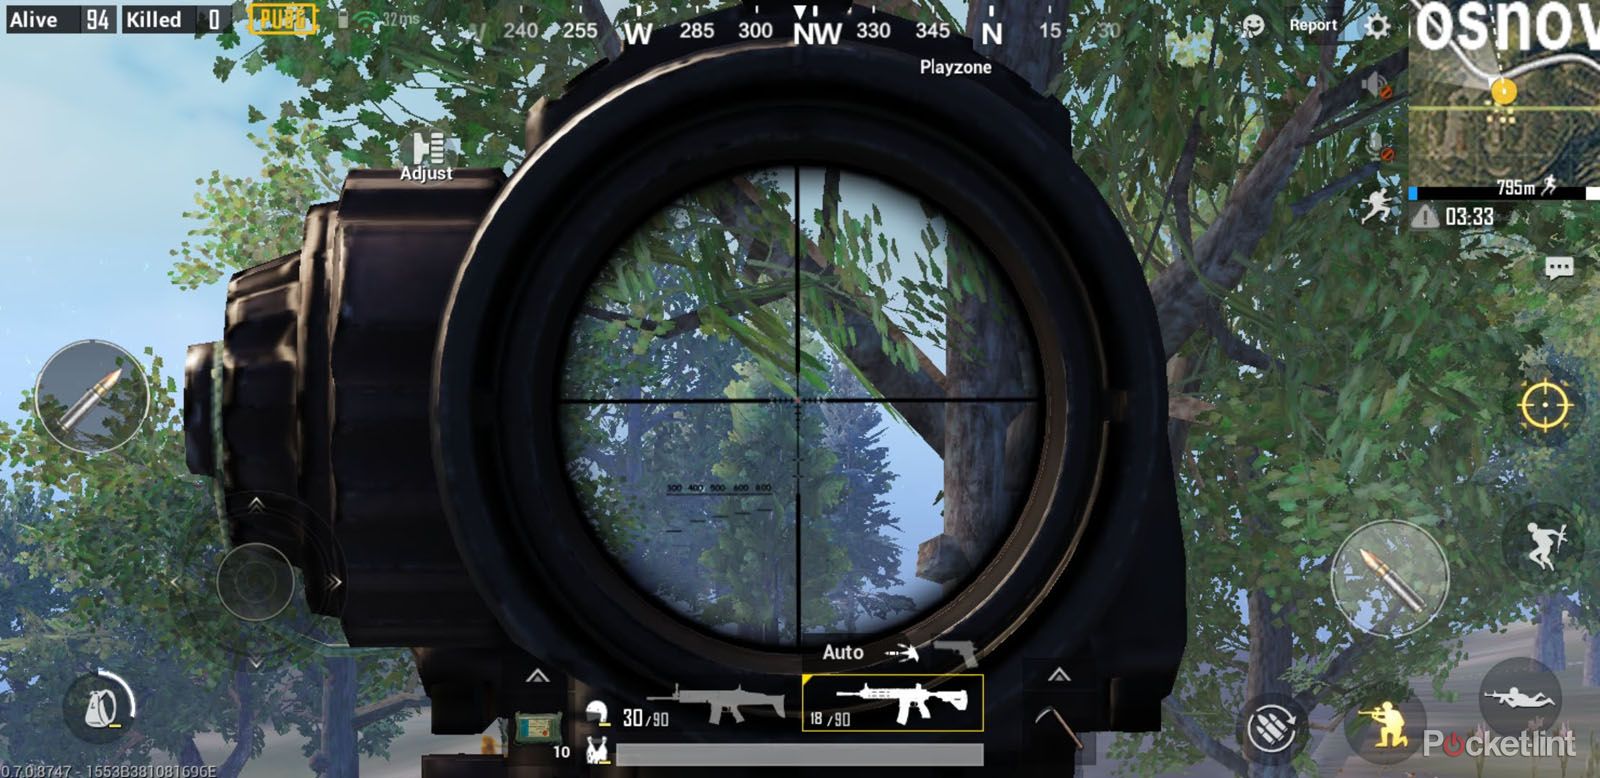 PlayerUnknowns Battlegrounds Mobile image 3